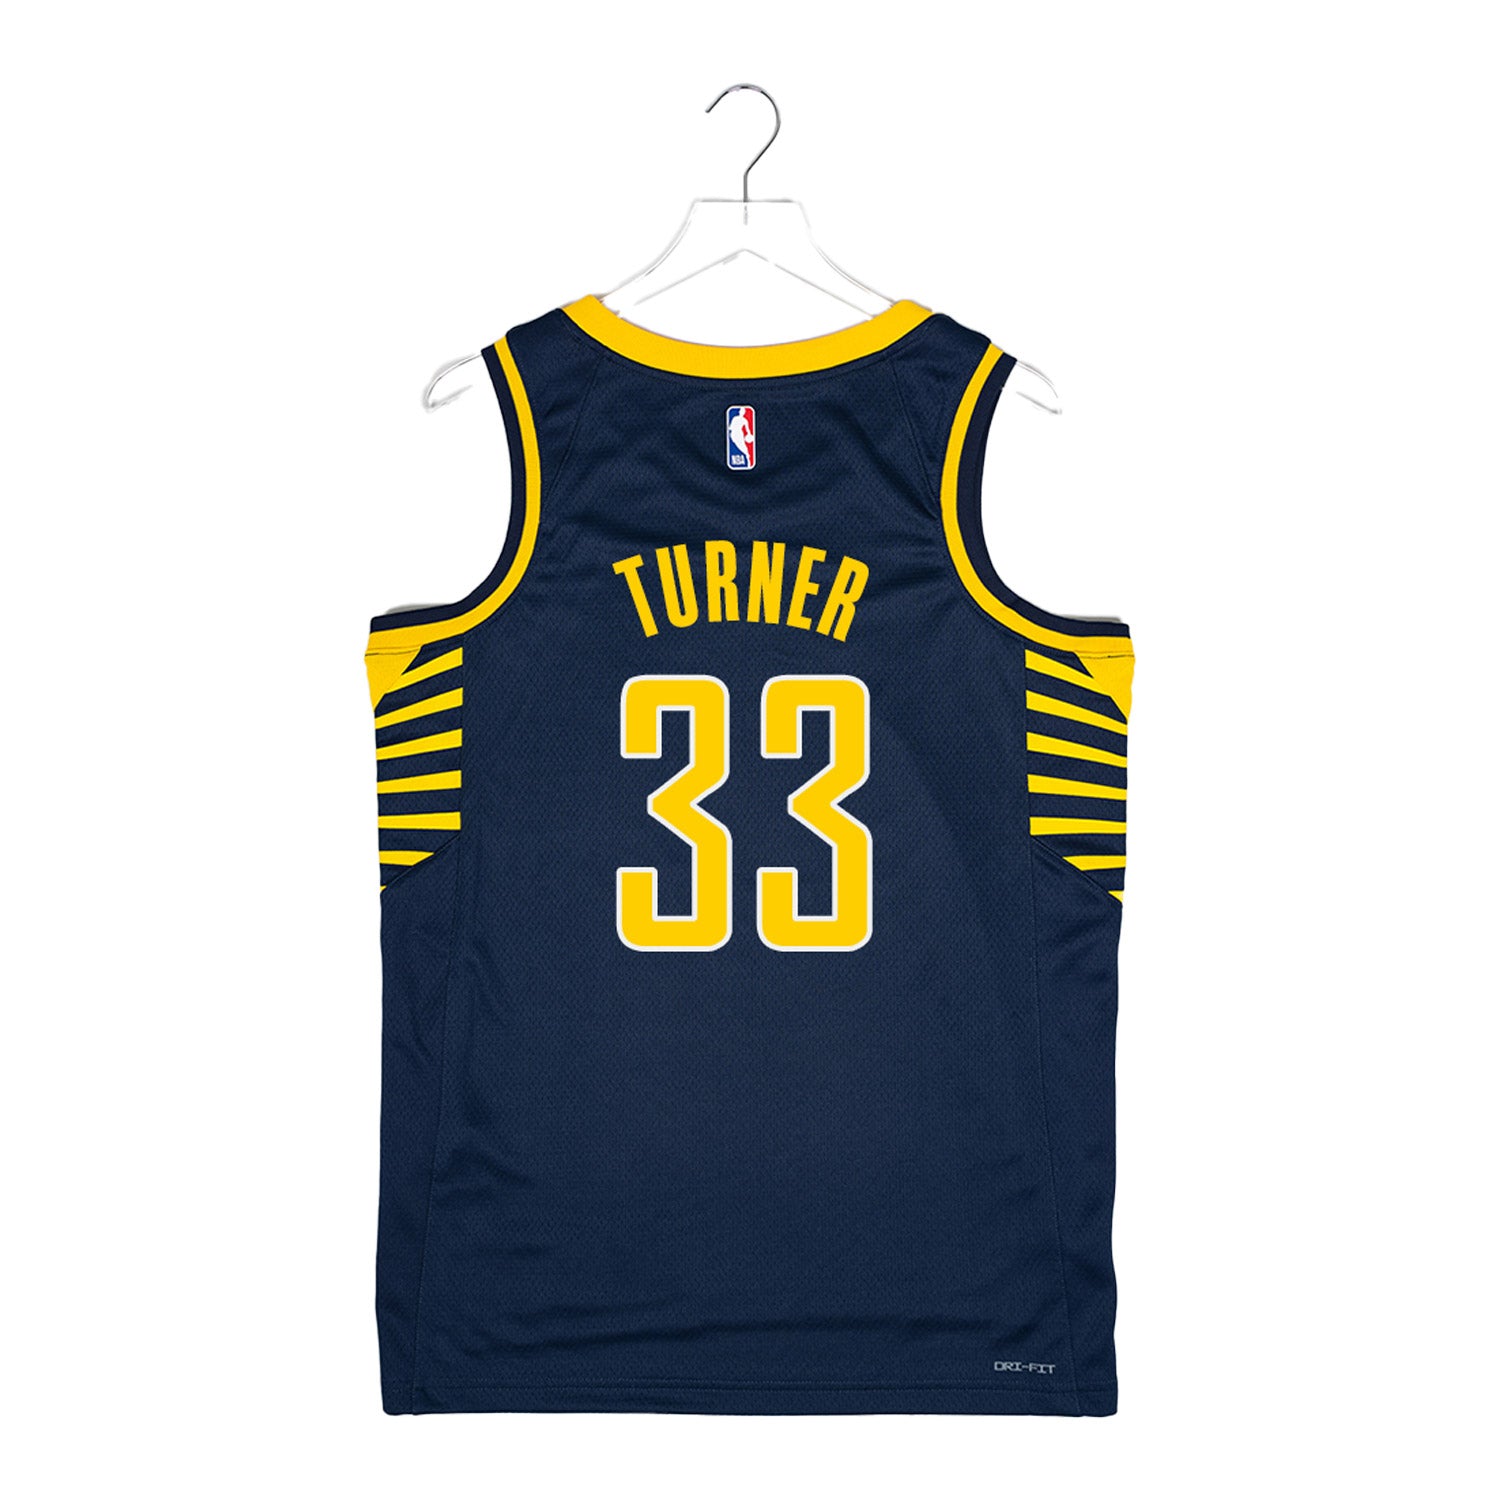 Indiana Pacers power forward jersey